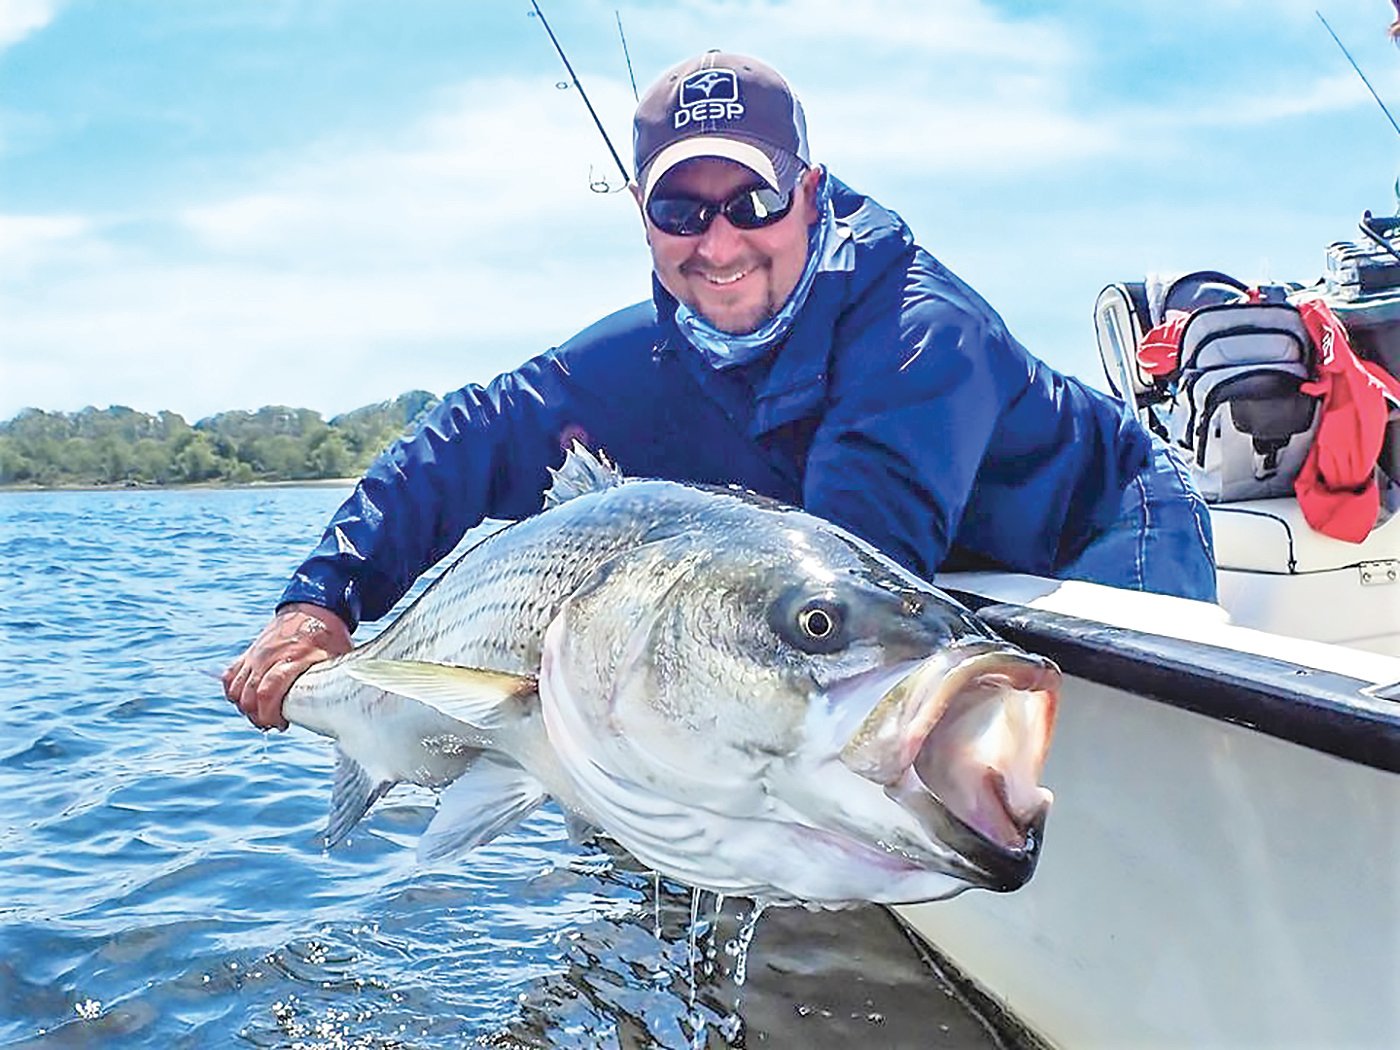 Capt. Jack Sprengel of East Coast Charters will be the quest speaker at the Saltwater Anglers seminar on Monday, Jan. 30, at 7 p.m.